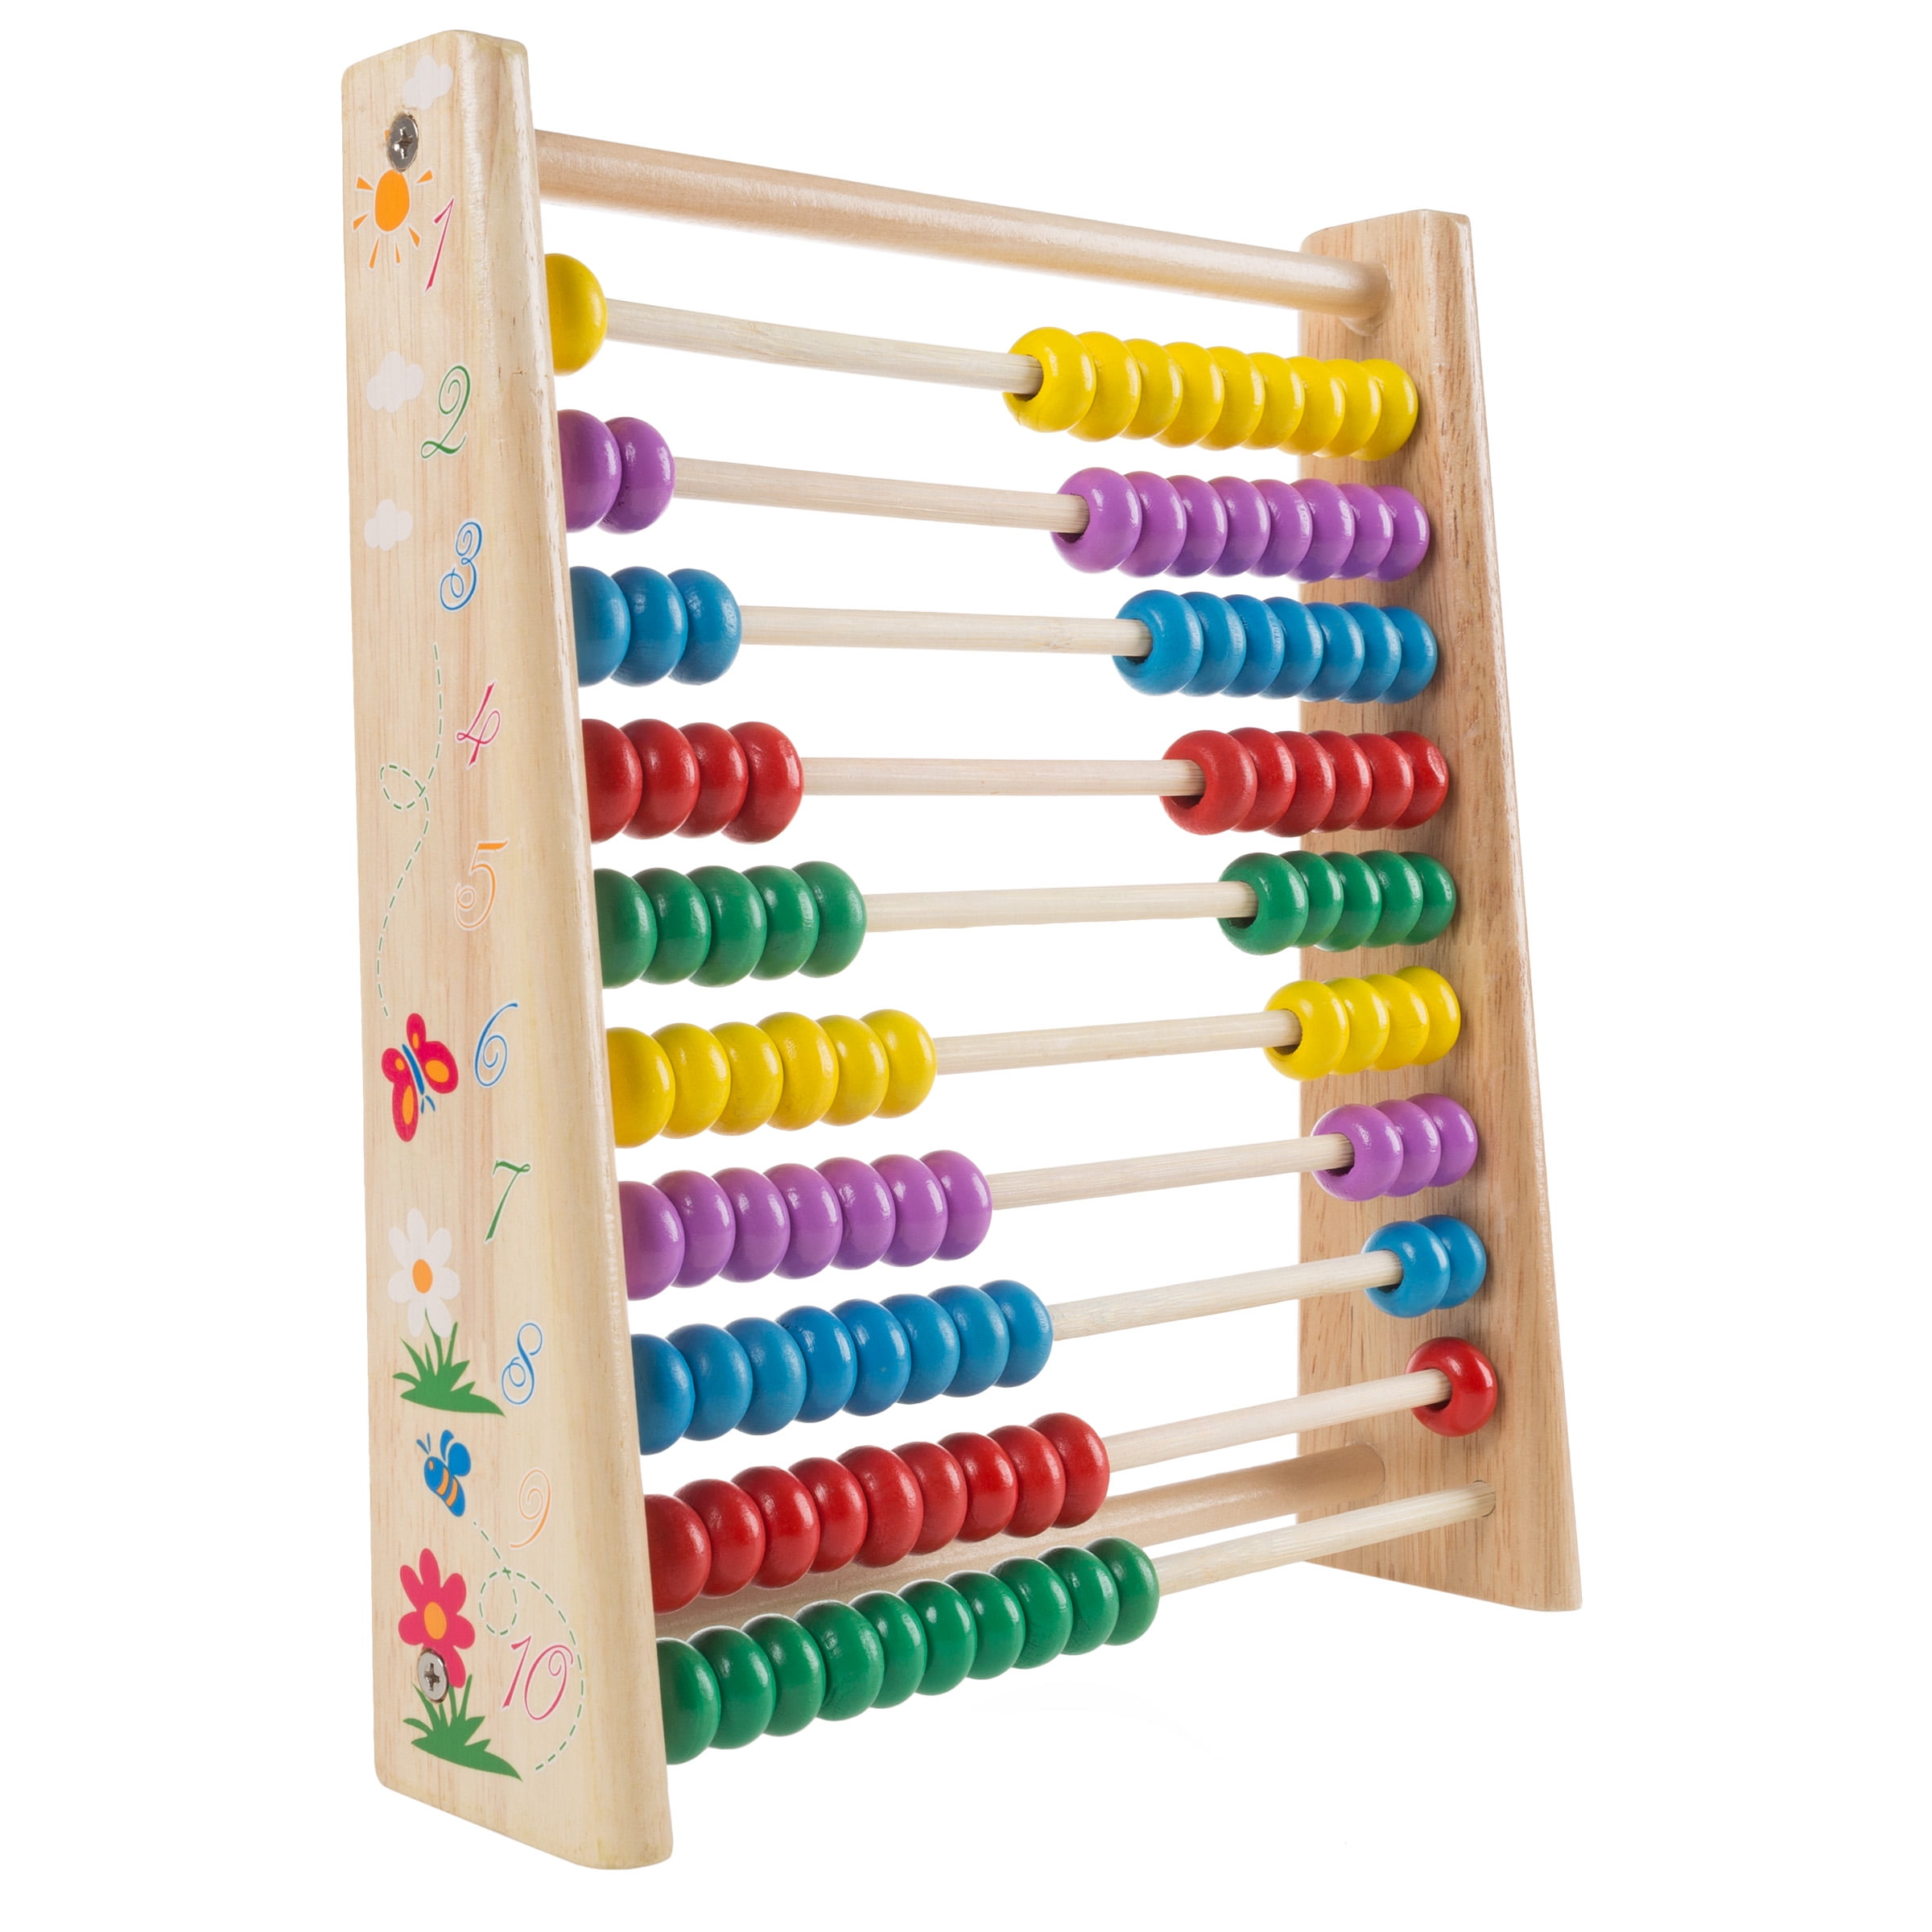 ABAC Abaco didattico vintage legno naturale wooden Abacus '60 toy learn to count NEW 